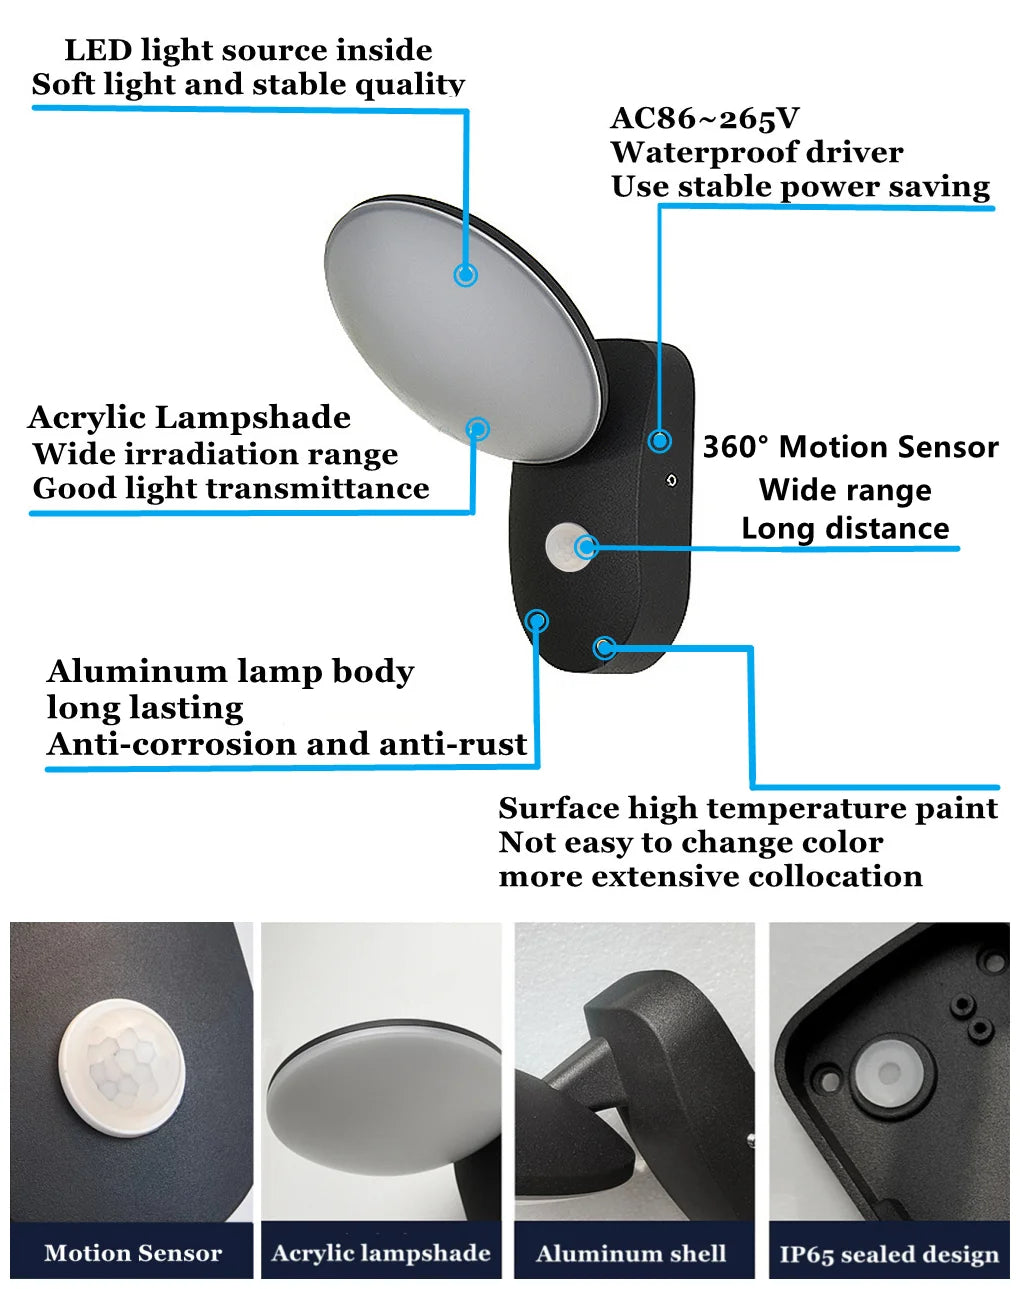 Waterproof LED wall light with motion sensor and stable glow, featuring durable aluminum shell.